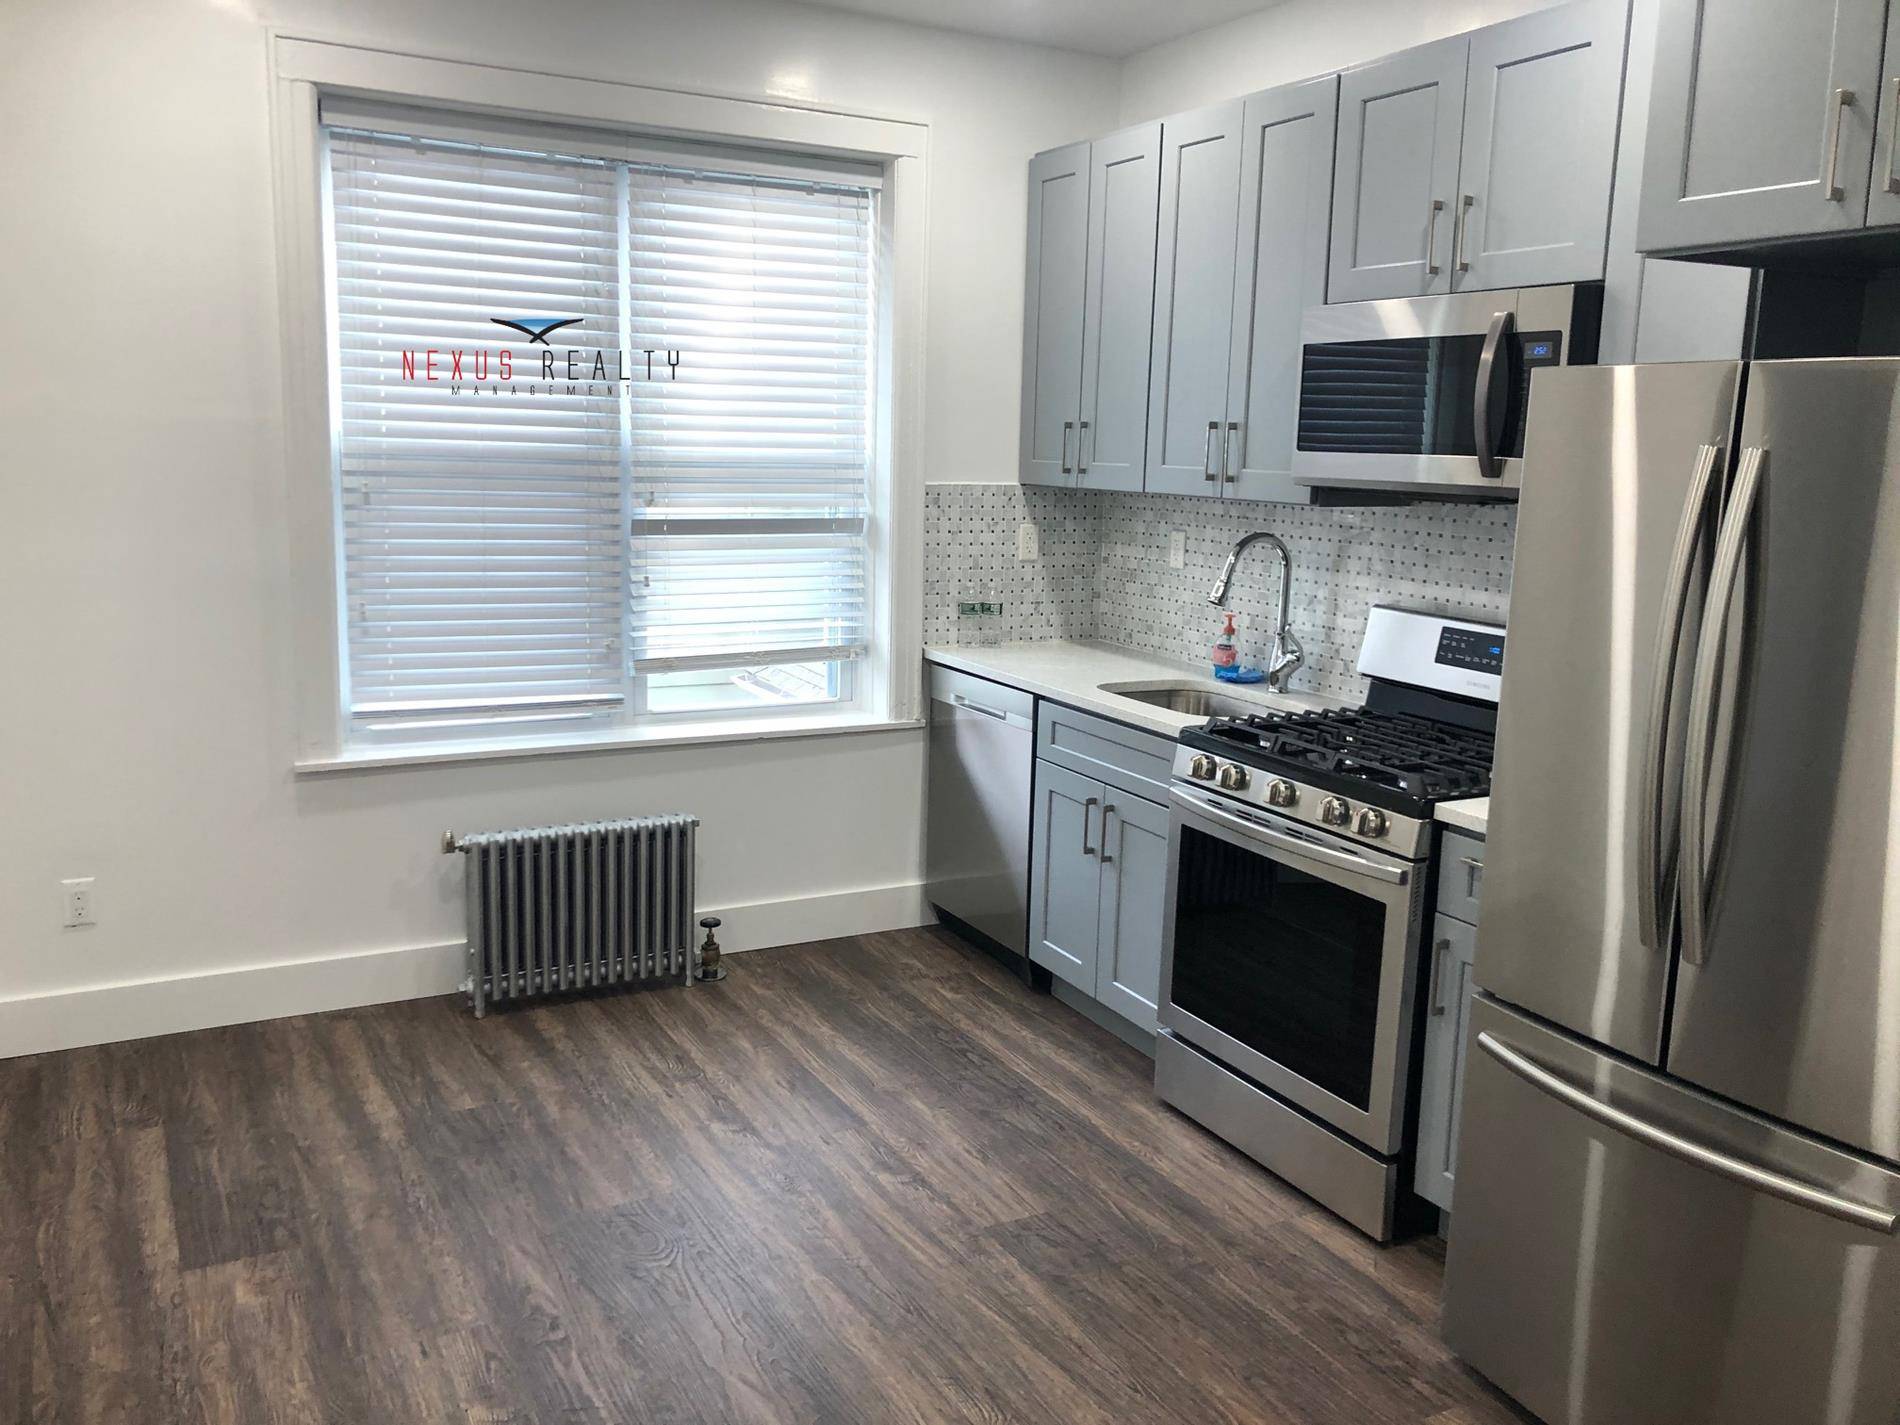 Gut renovated 3 Bedroom apartment in Corona ONLY 2500Queen size bedrooms on the 2nd floor in 3 story walk up buildingUpdated open kitchen with stainless steel appliances, dishwasher, microwave, and ...